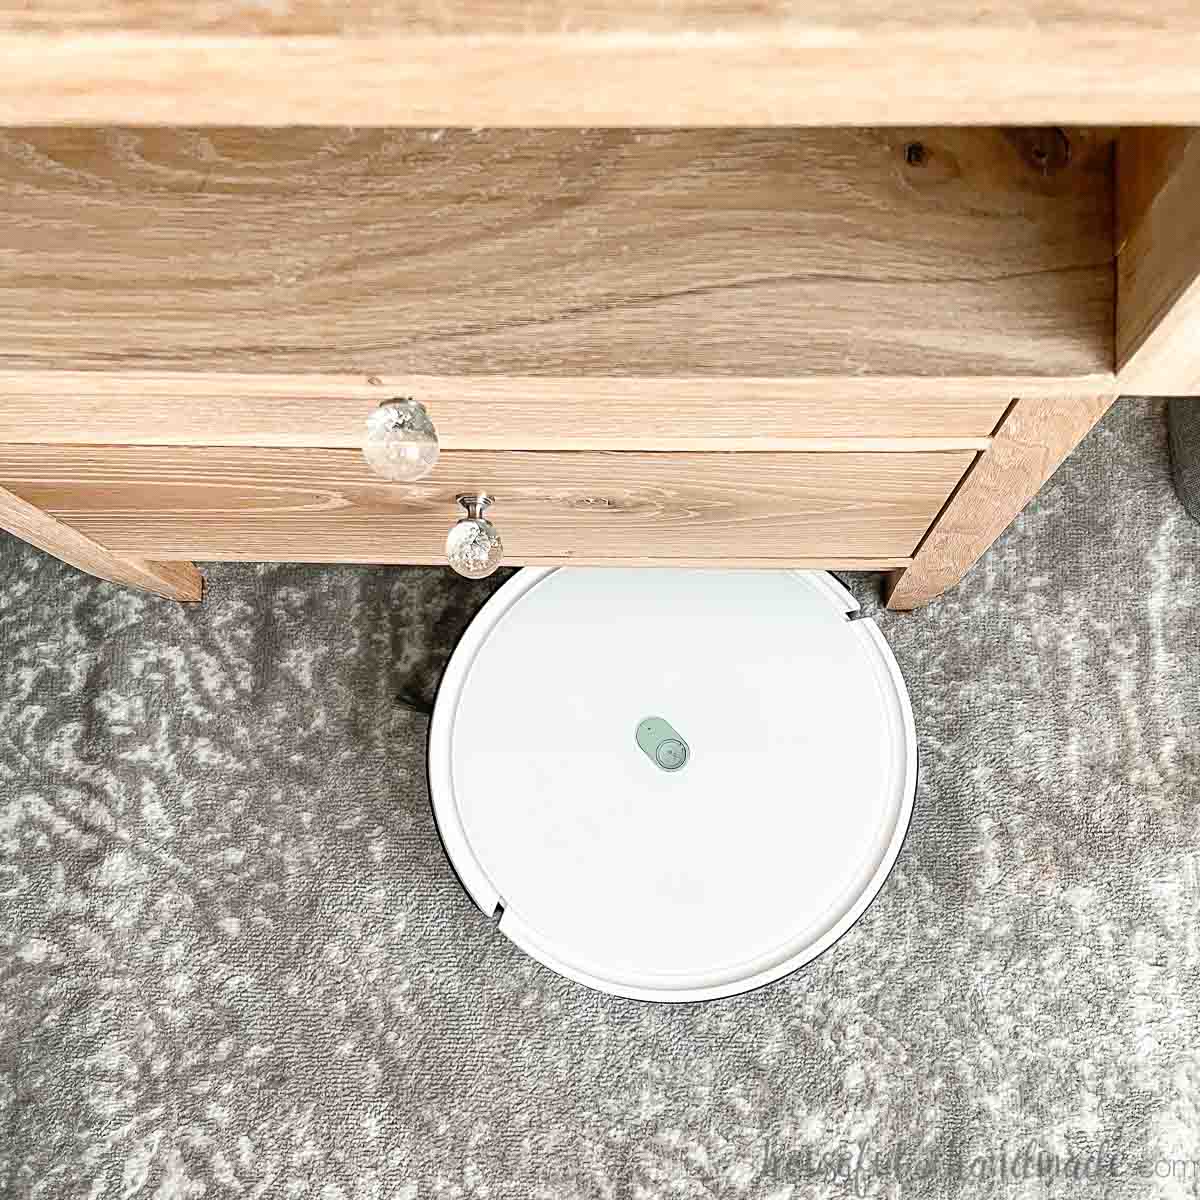 Looking down at the front of a nightstand with a white Yeedi robot vacuum cleaning the gray and white rug below it.